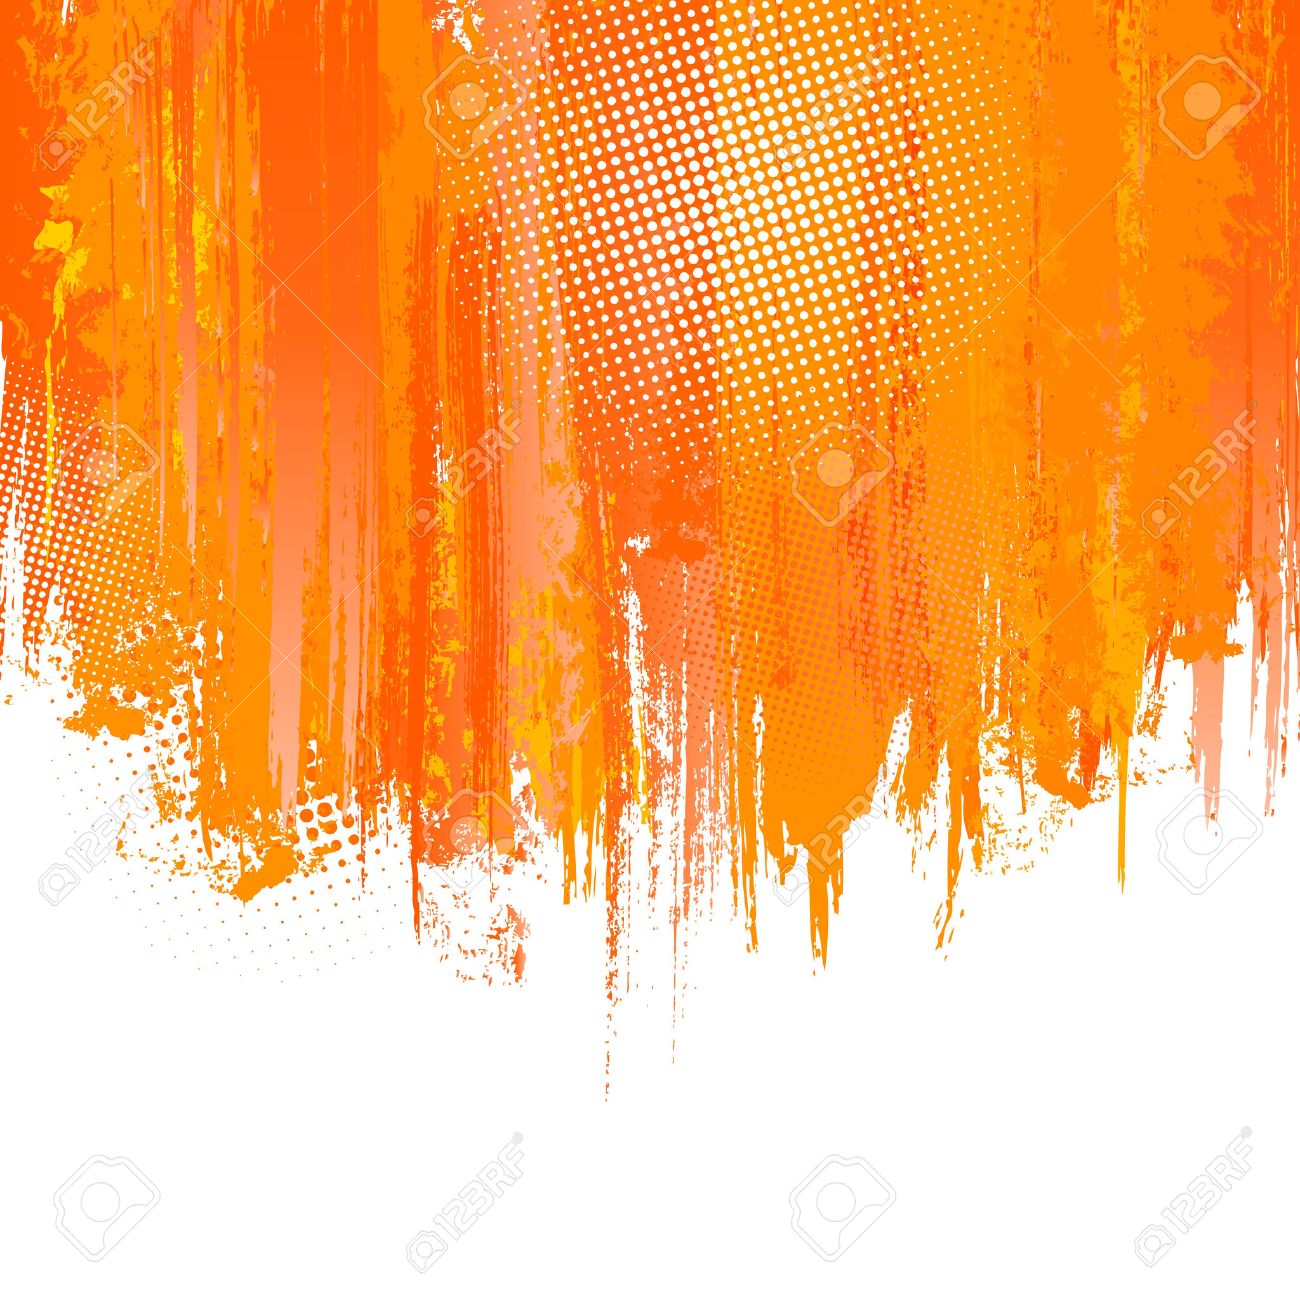 Orange Paint Splashes Background Vector With Place